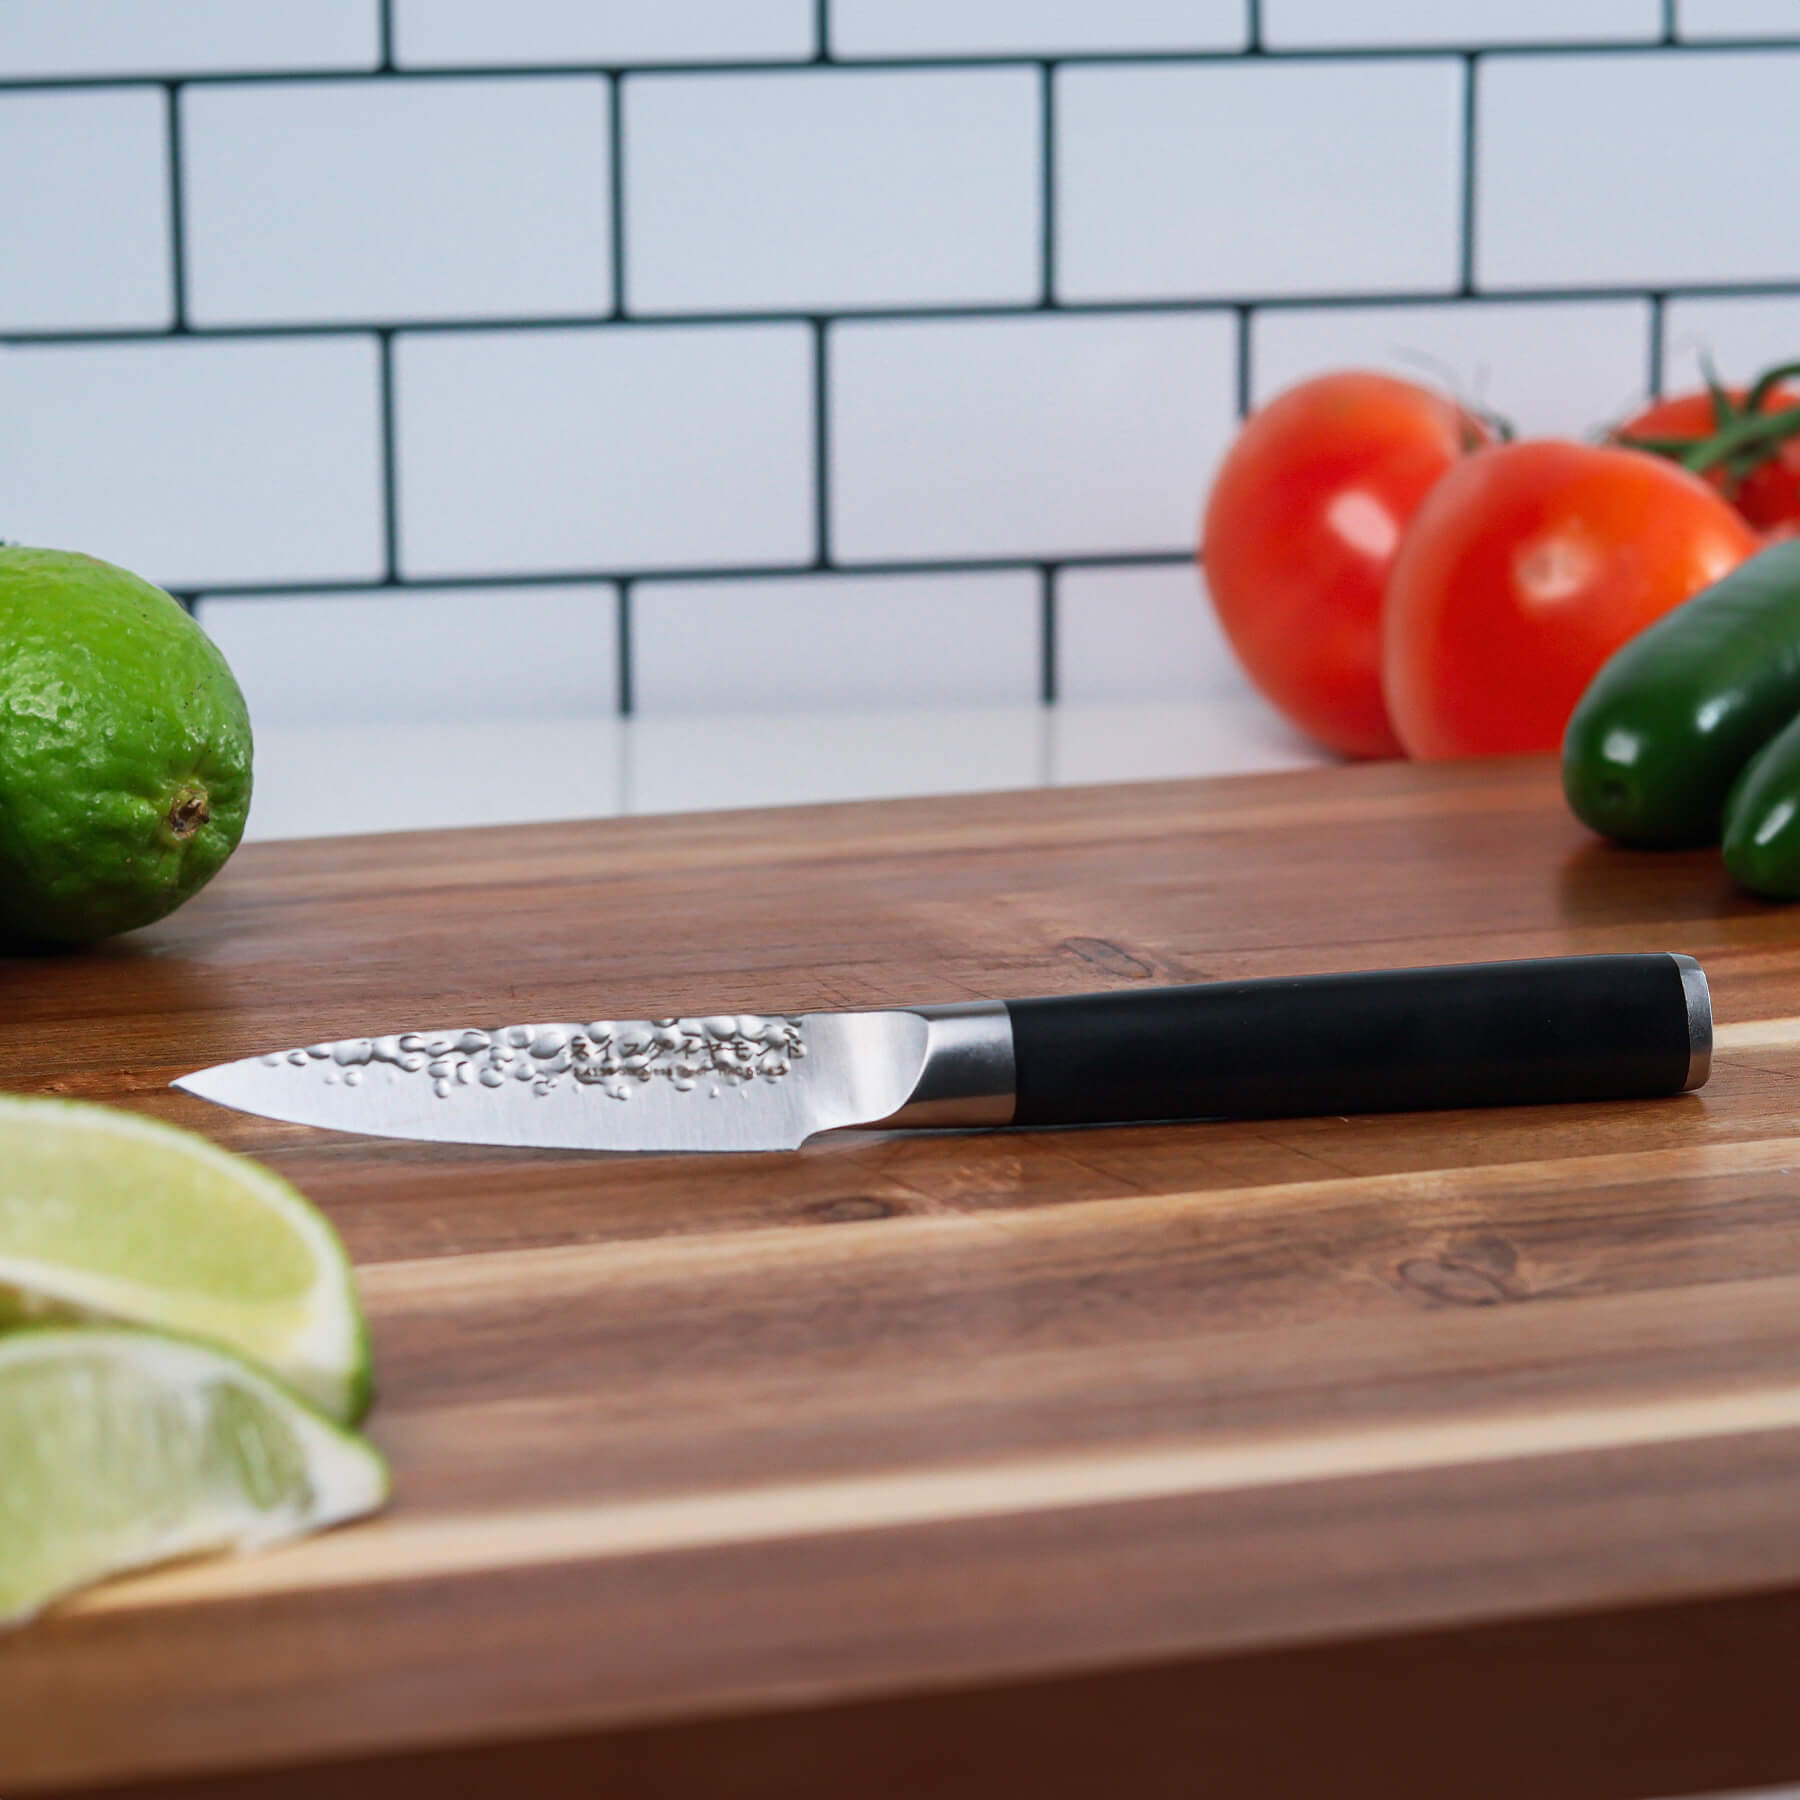 4" Hammered Paring Knife on cutting board with vegetables